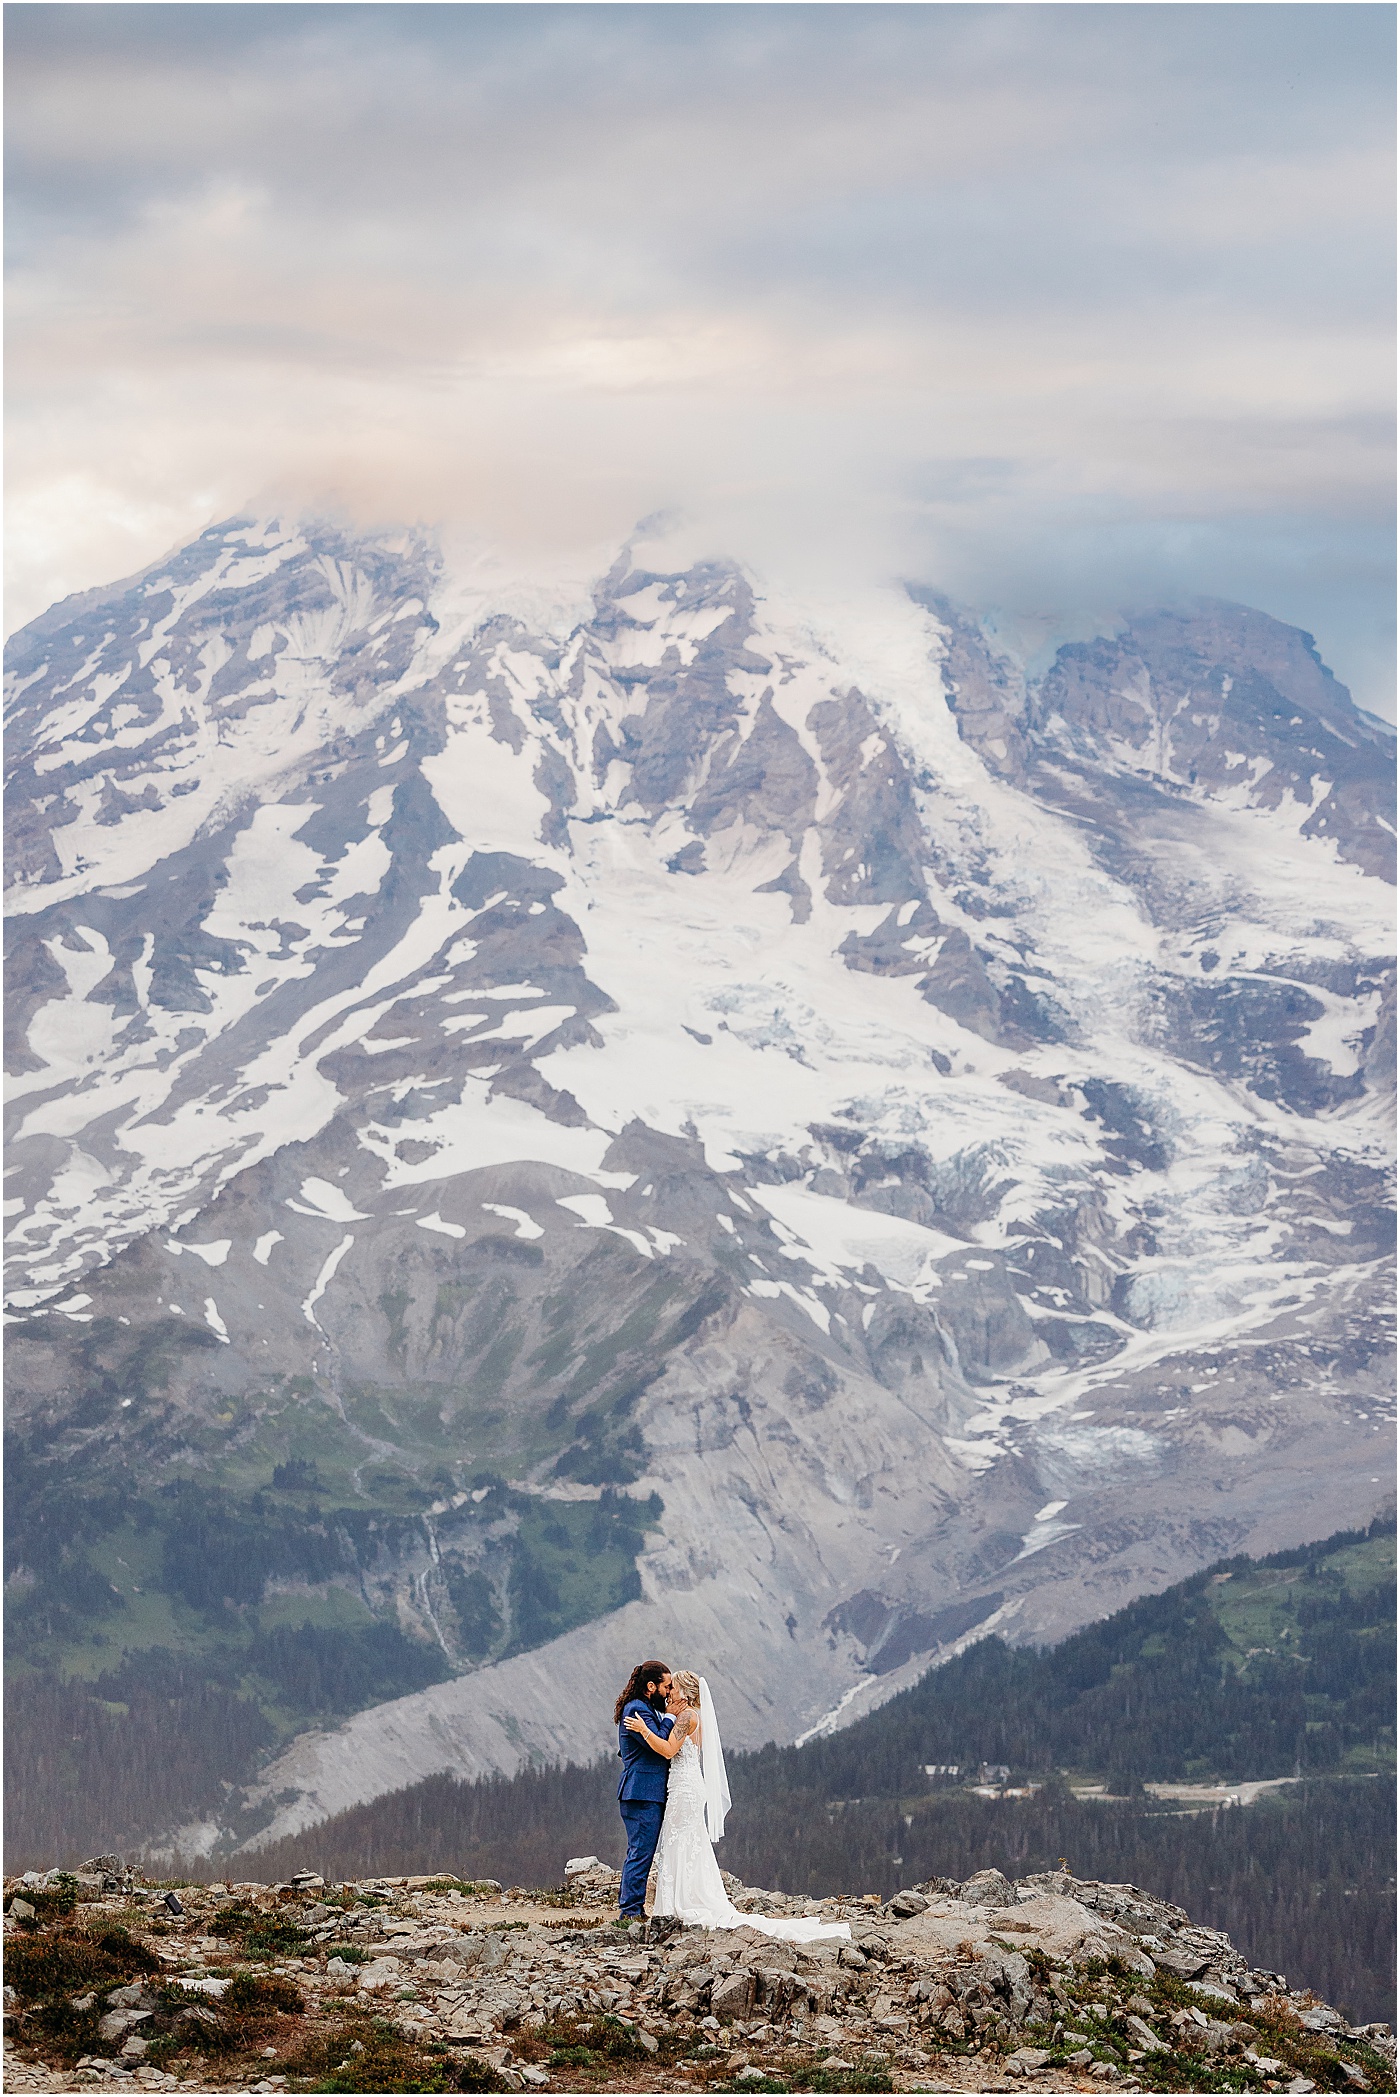 Bride and groom portraits with Snowy Mt. Rainier in the background | Photo by Megan Montalvo Photography